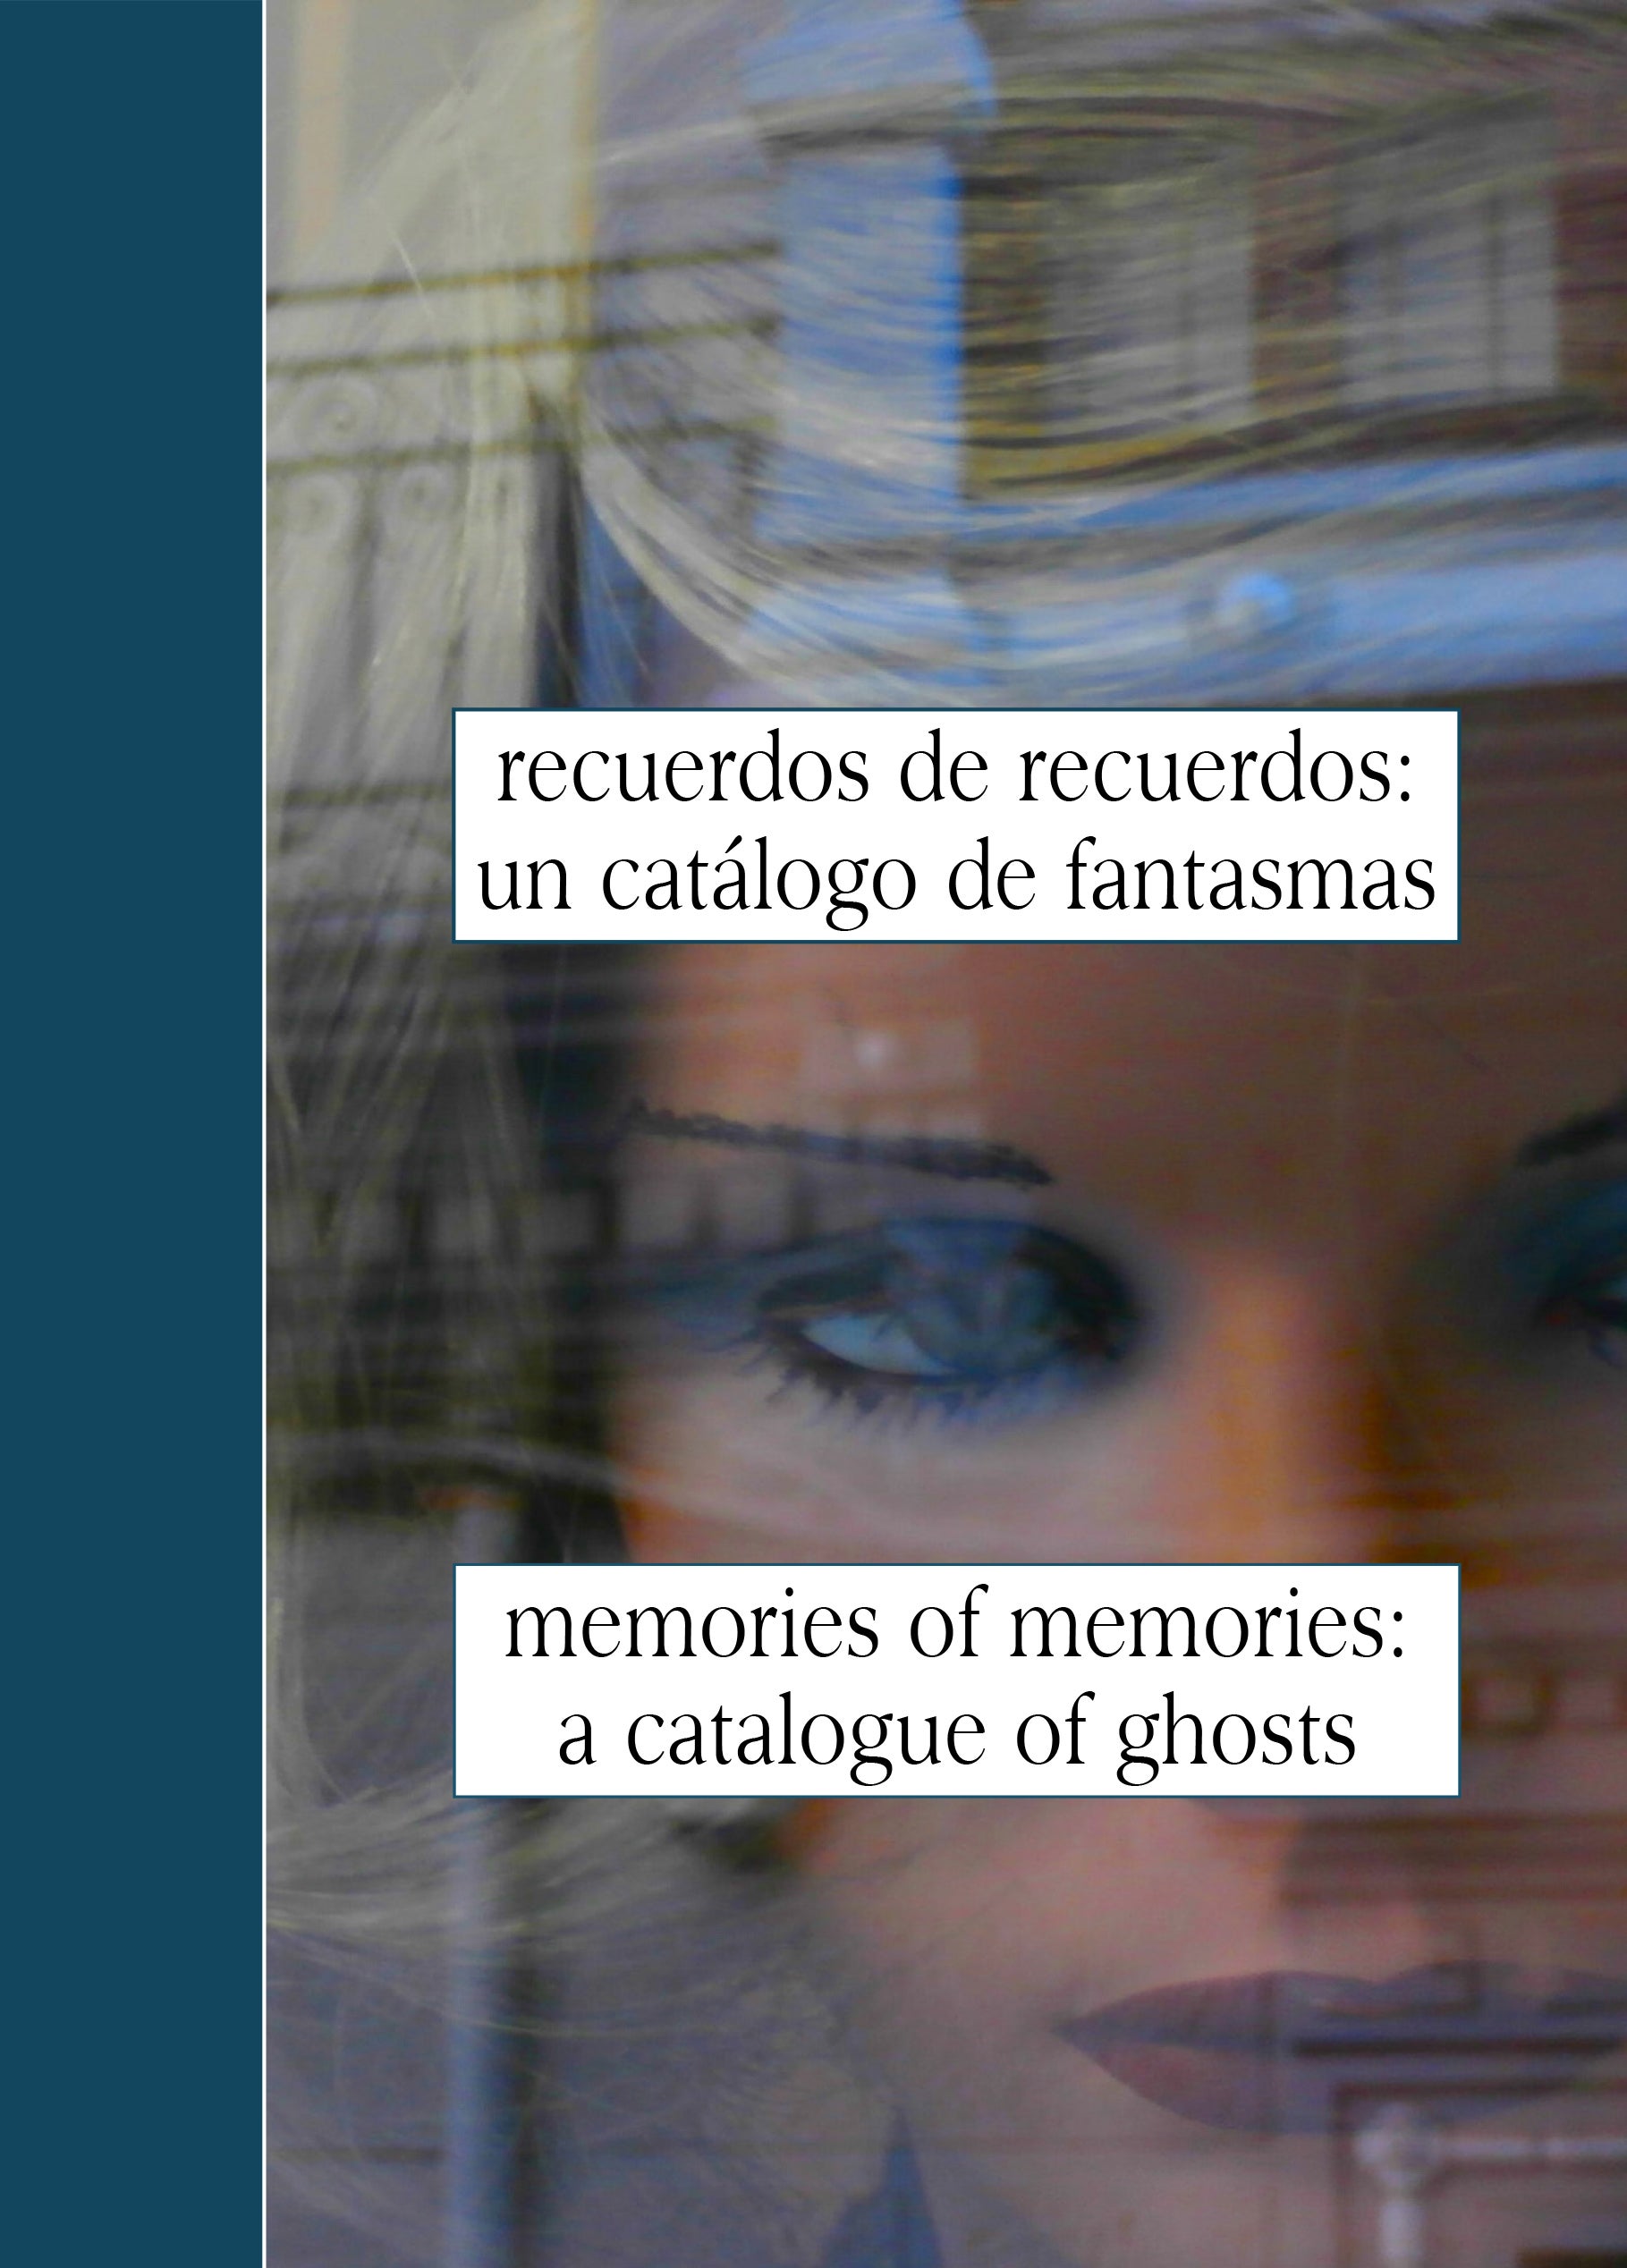 Memories of Memories: a Catalogue of Ghosts